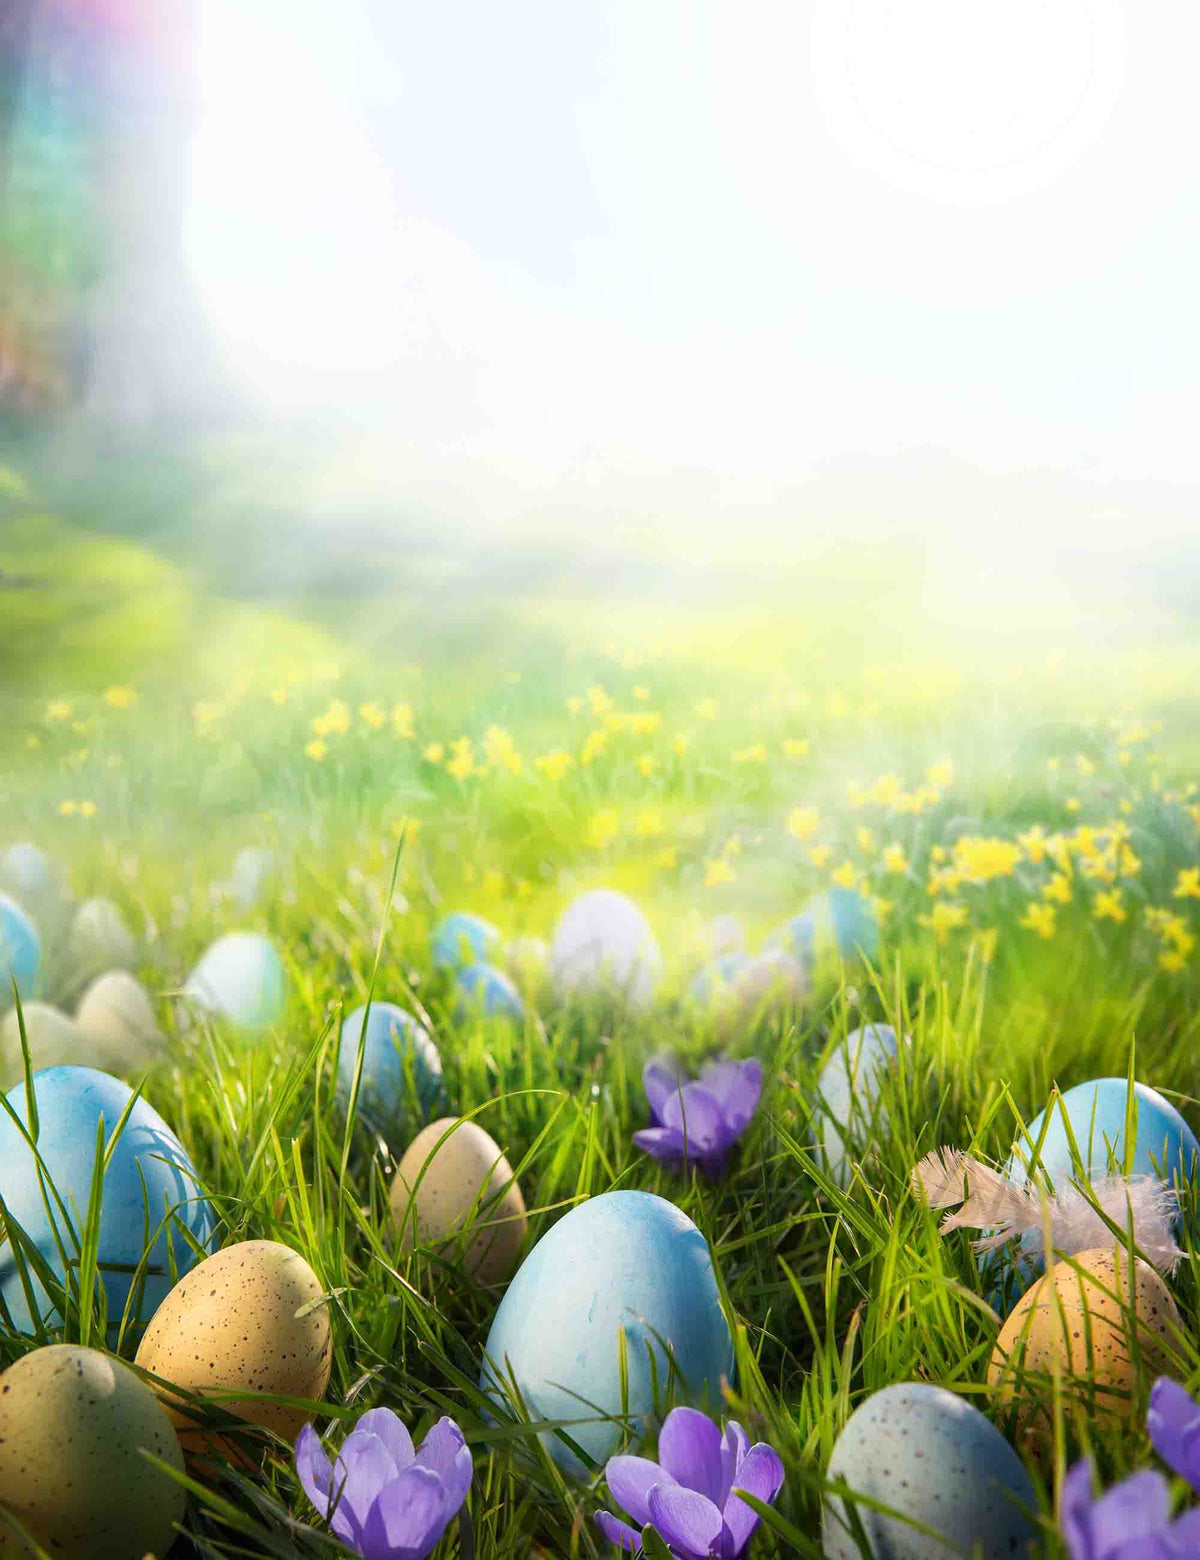 Printed Colorful Easter Eggs On The Grass In The Sunshine Backdrop For Photography Shopbackdrop